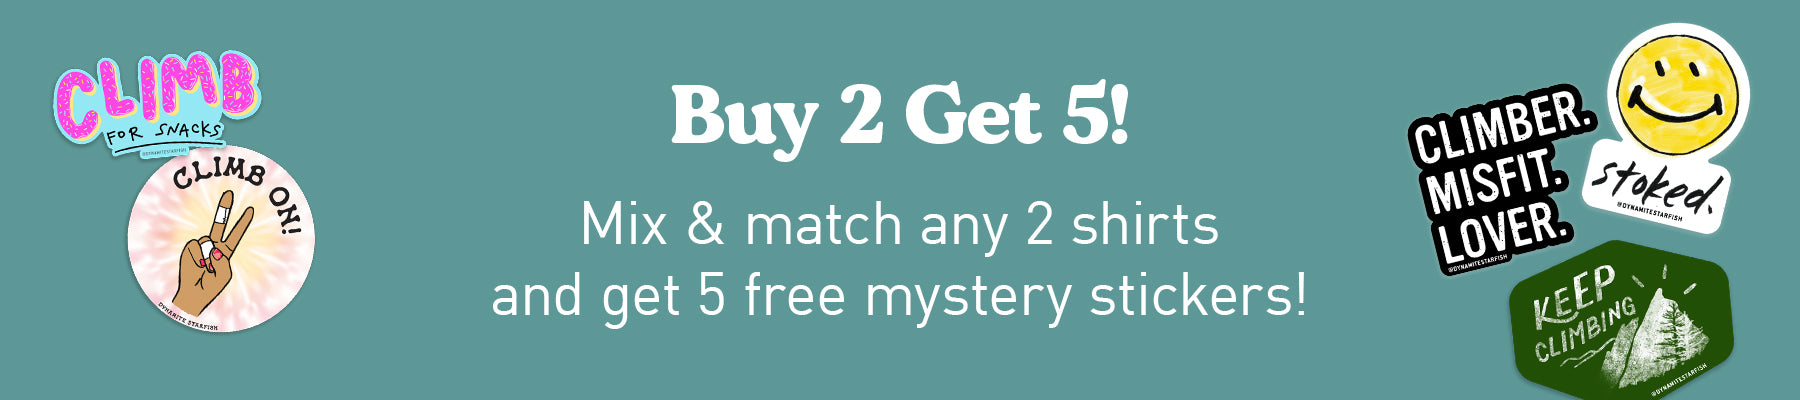 Buy 2 Apparel Items Get 5 Free Mystery Stickers